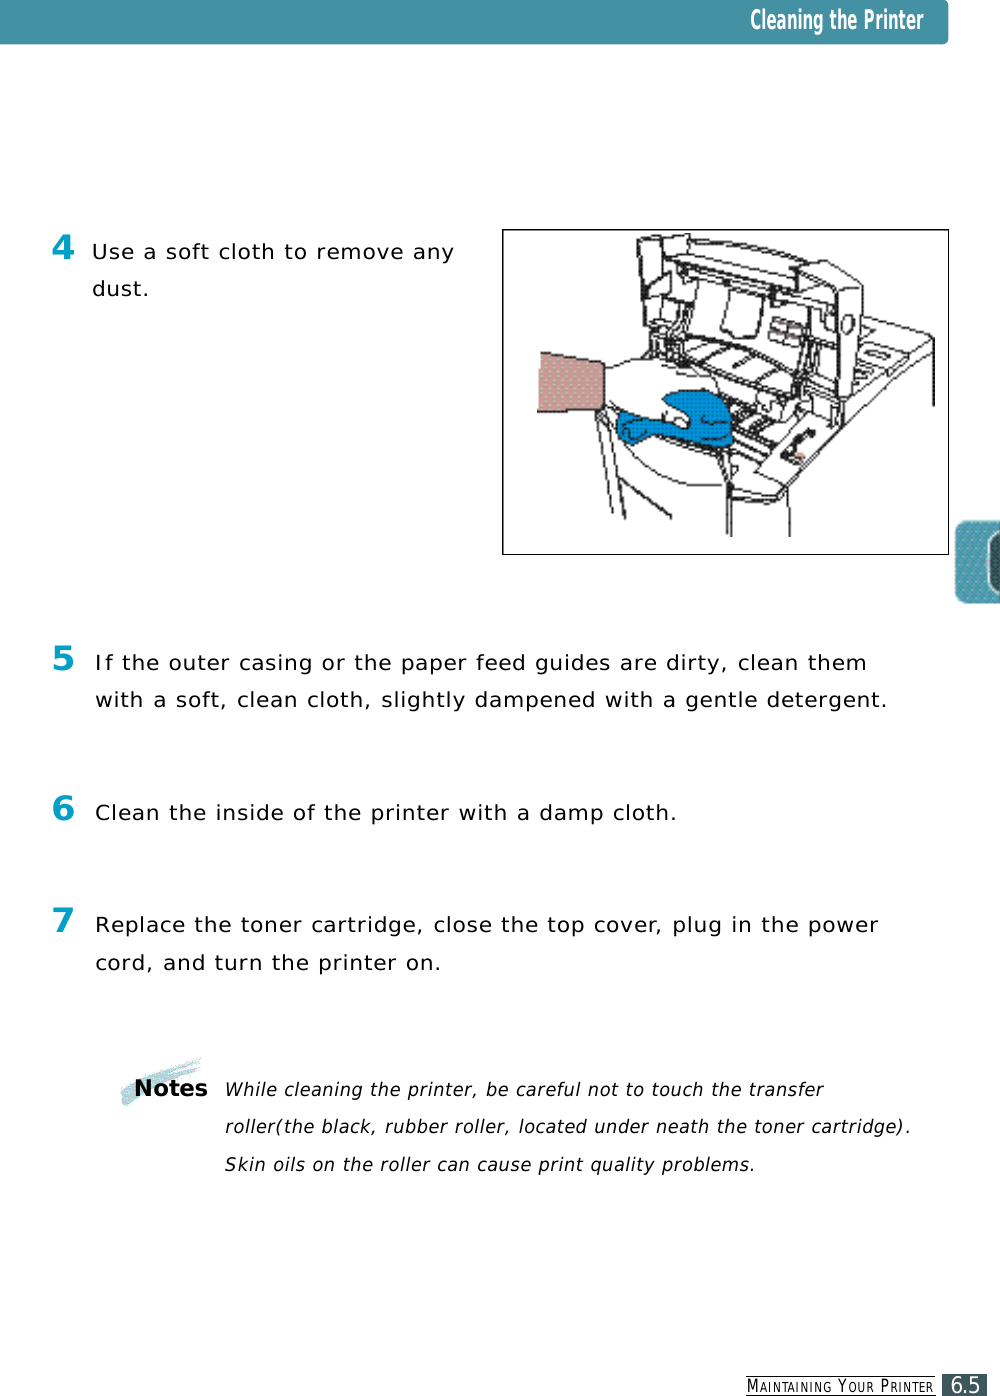 MA I N TA I N I N G YO U R PR I N T E R6.5Cleaning the Printer4Use a soft cloth to remove anyd u s t .5If the outer casing or the paper feed guides are dirty, clean themw i t h a soft, clean cloth, slightly dampened with a gentle detergent.6Clean the inside of the printer with a damp cloth.7Replace the toner cartridge, close the top cove r, plug in the powercord, and turn the printer on. Notes While cleaning the printer, be careful not to touch the transfer roller(the black, rubber roller, located under neath the toner cartridge). Skin oils on the roller can cause print quality problems.